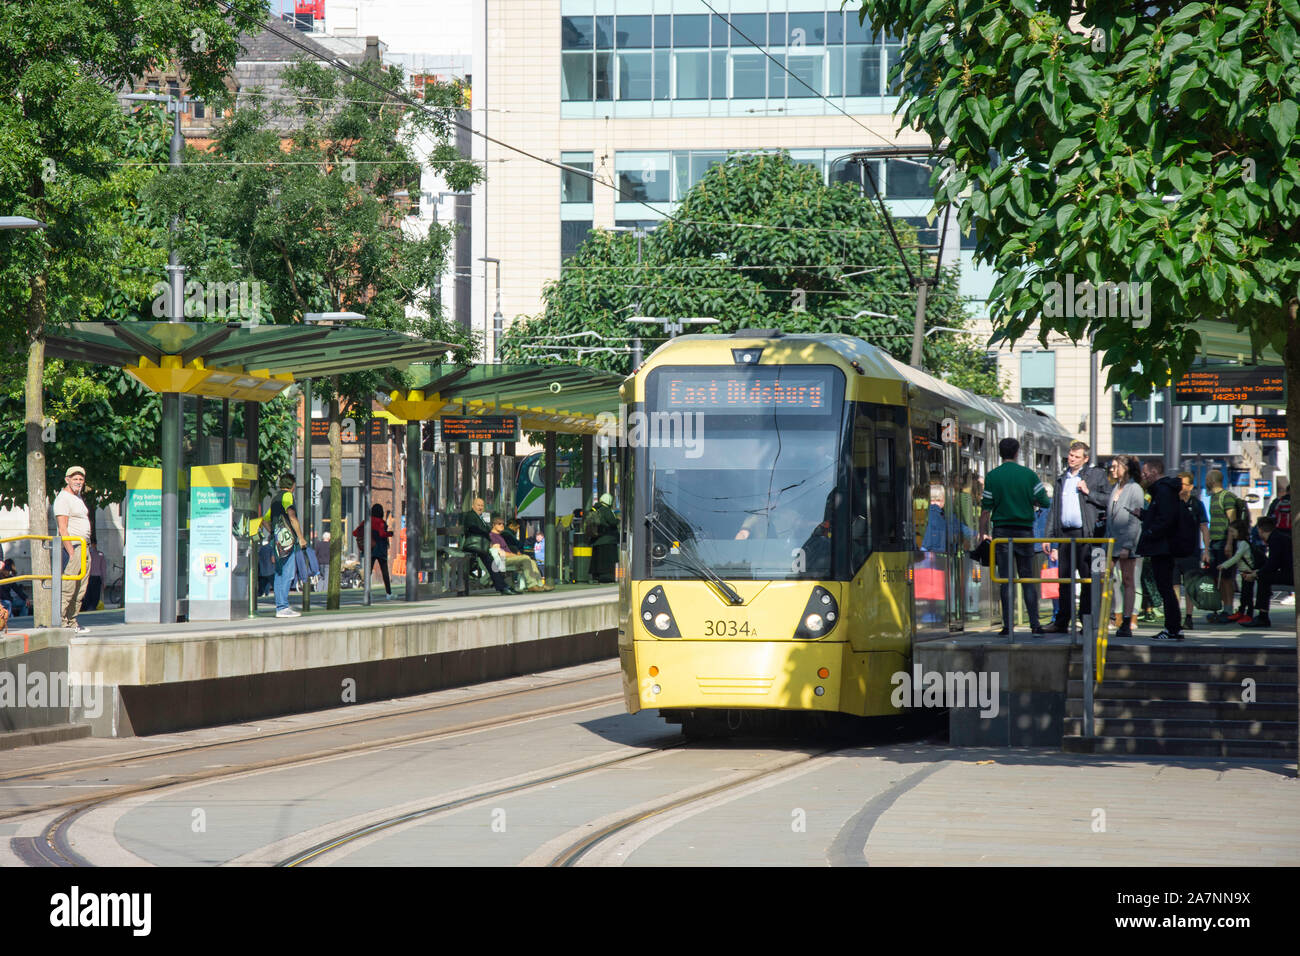 Manchester Metrolink train at St Peter's Square Station, St Peter's Square, Manchester, Greater Manchester, England, United Kingdom Stock Photo